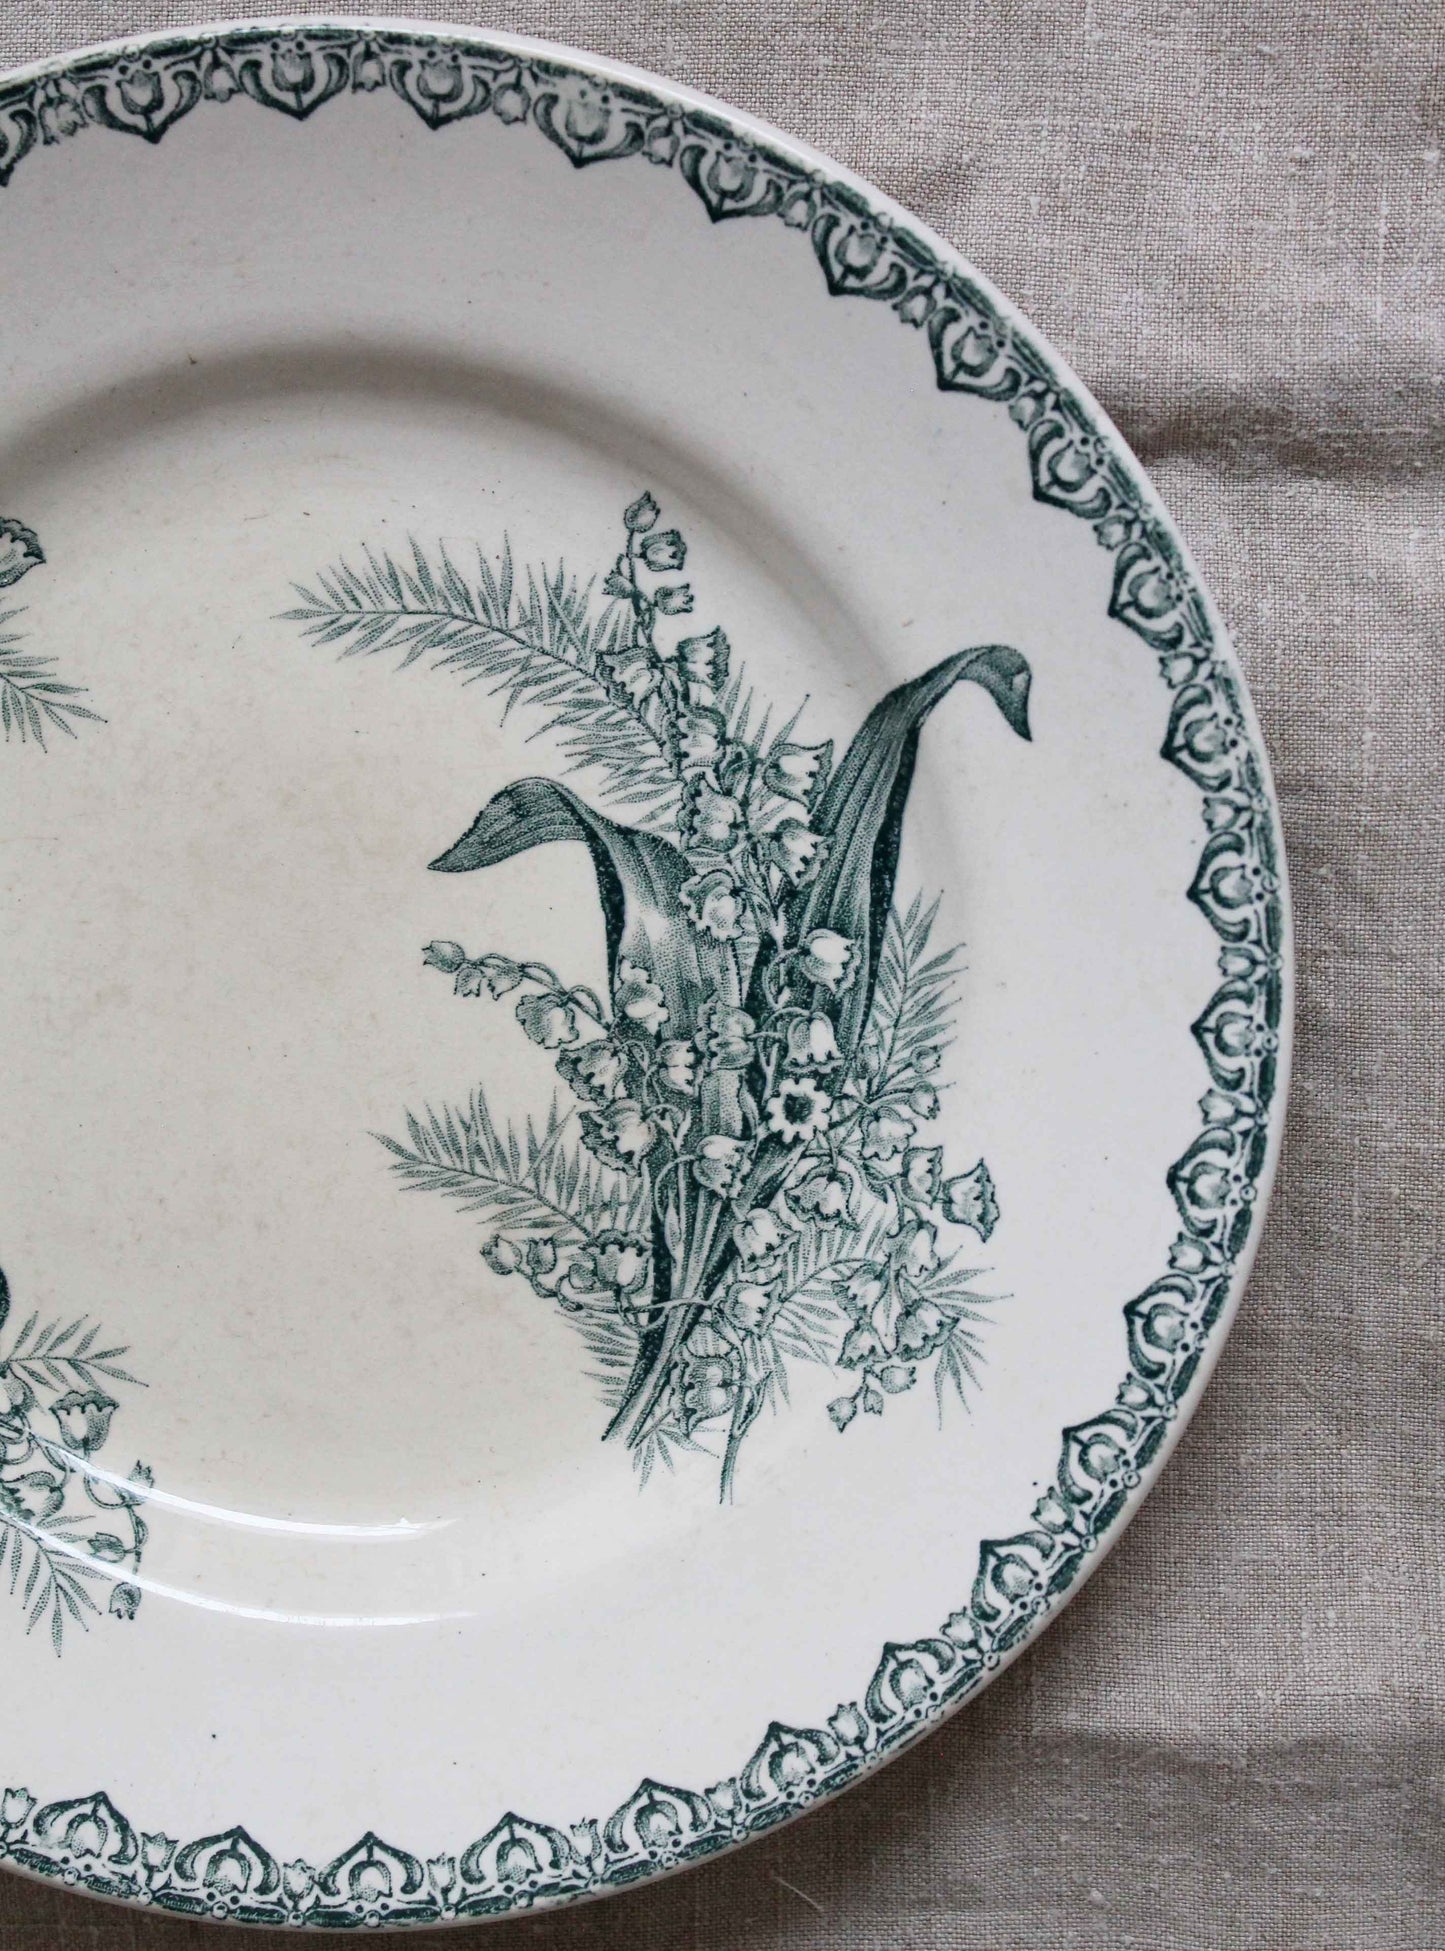 Vintage Lily of the Valley Plates